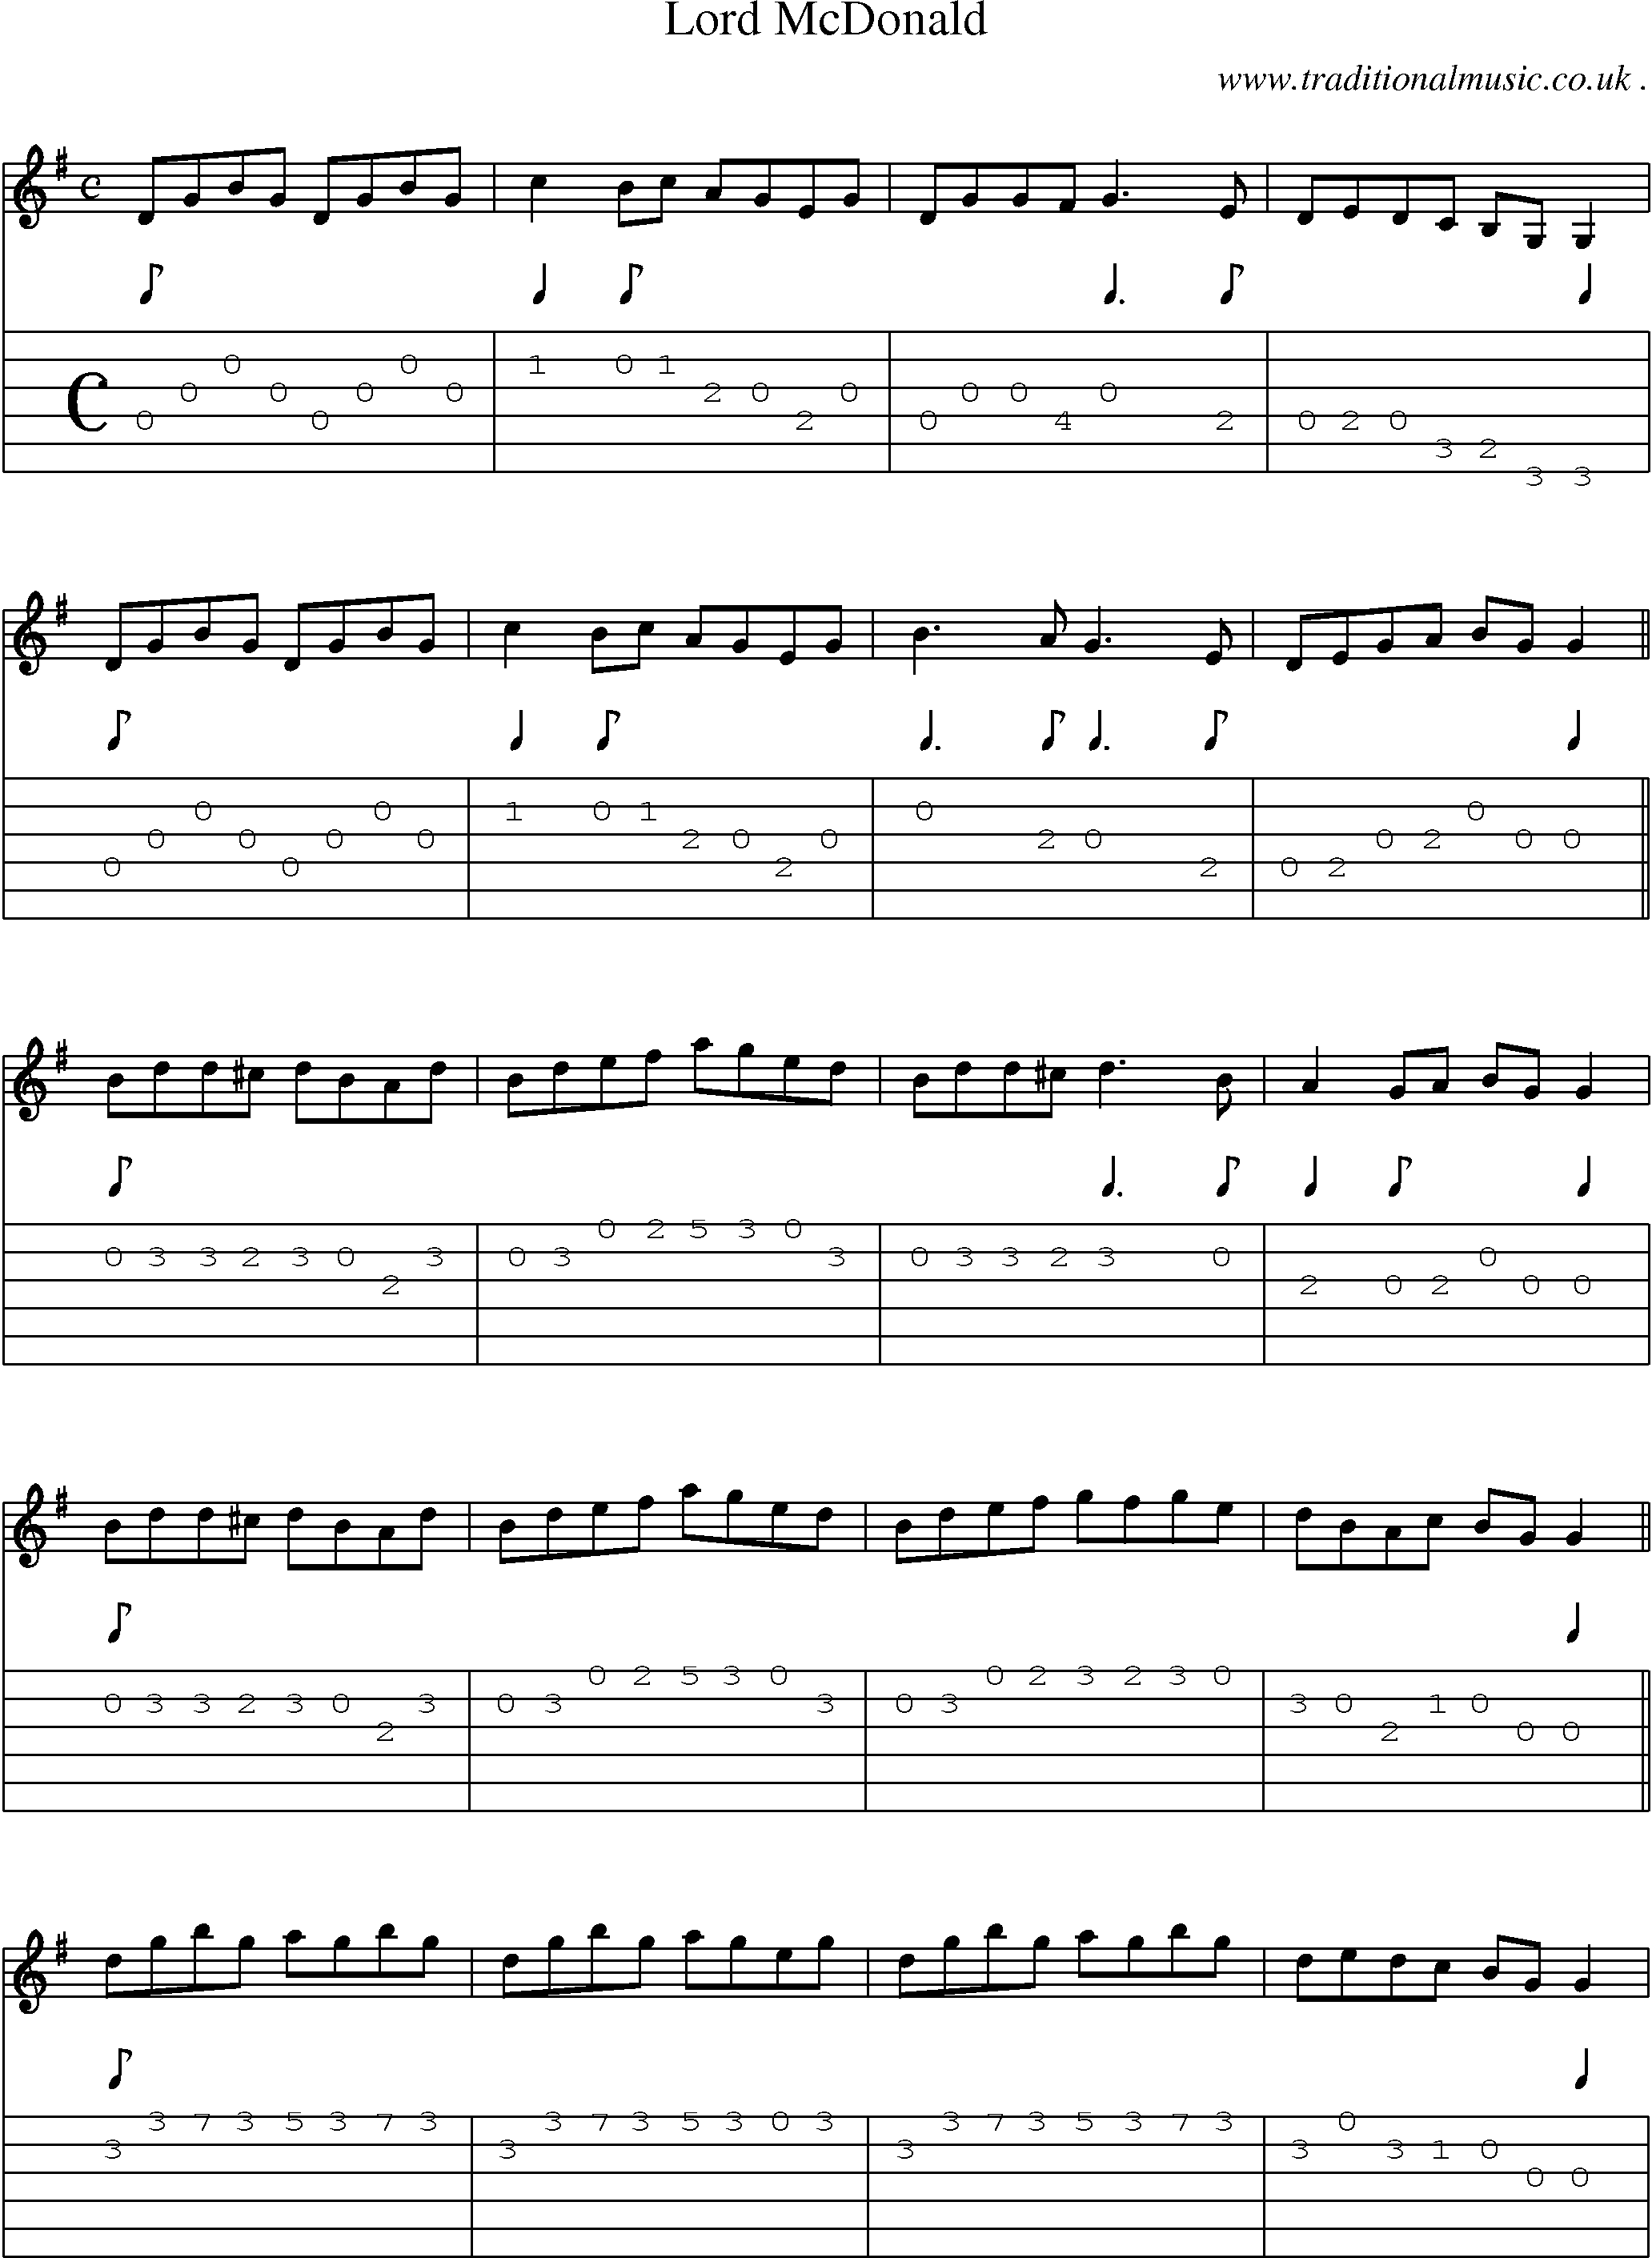 Sheet-Music and Guitar Tabs for Lord Mcdonald